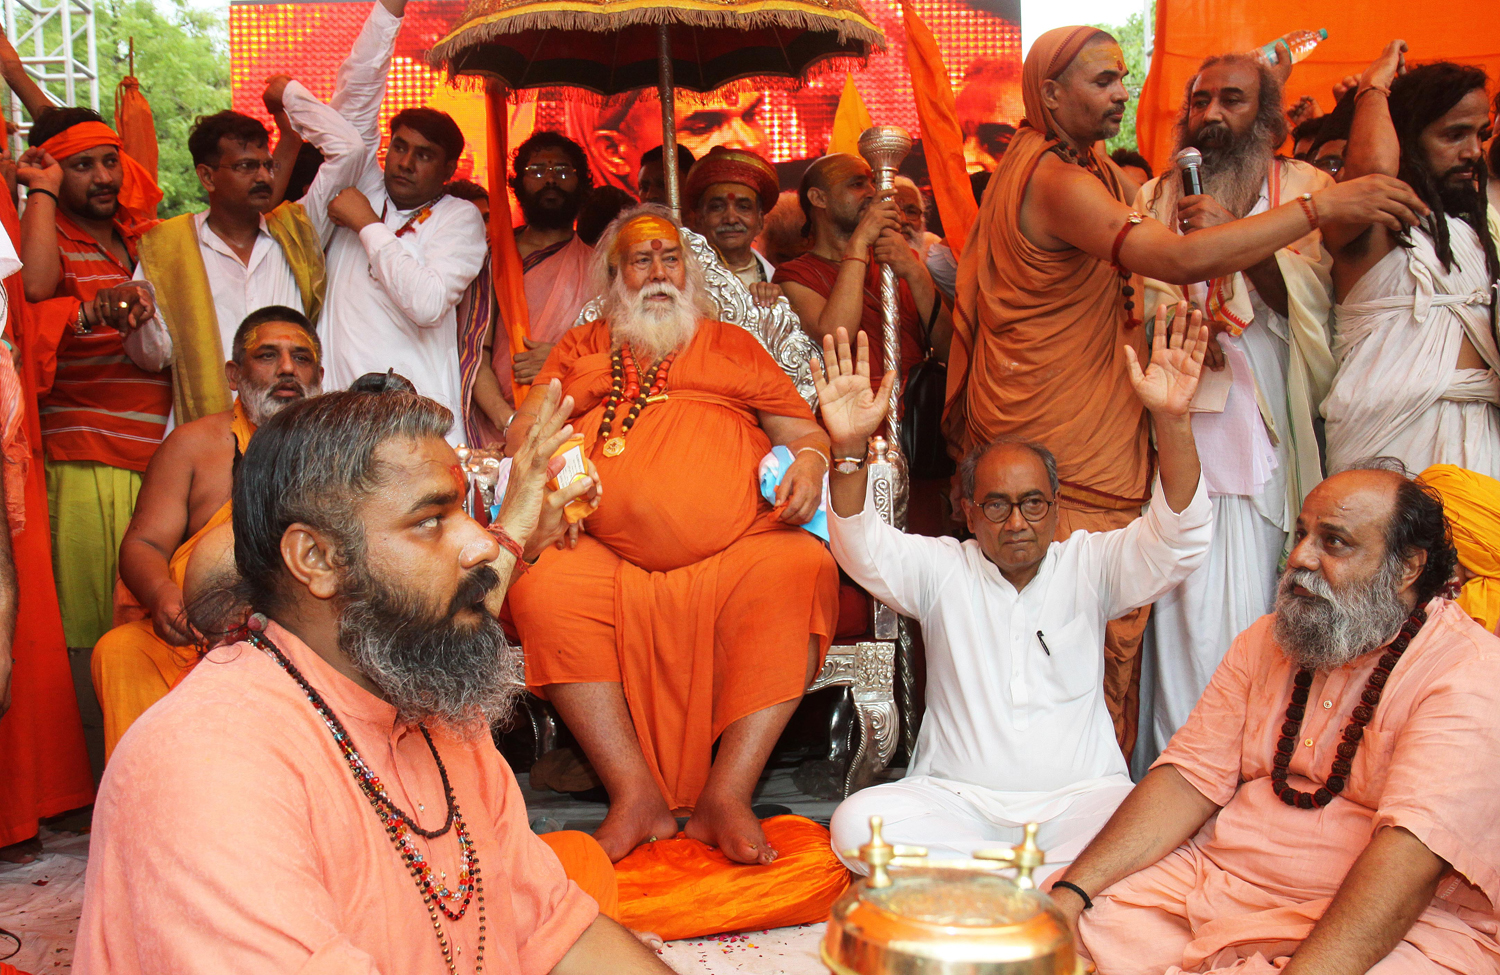 Did Congress's sadhu politics force VHP and RSS to shelve their temple agitation plan?